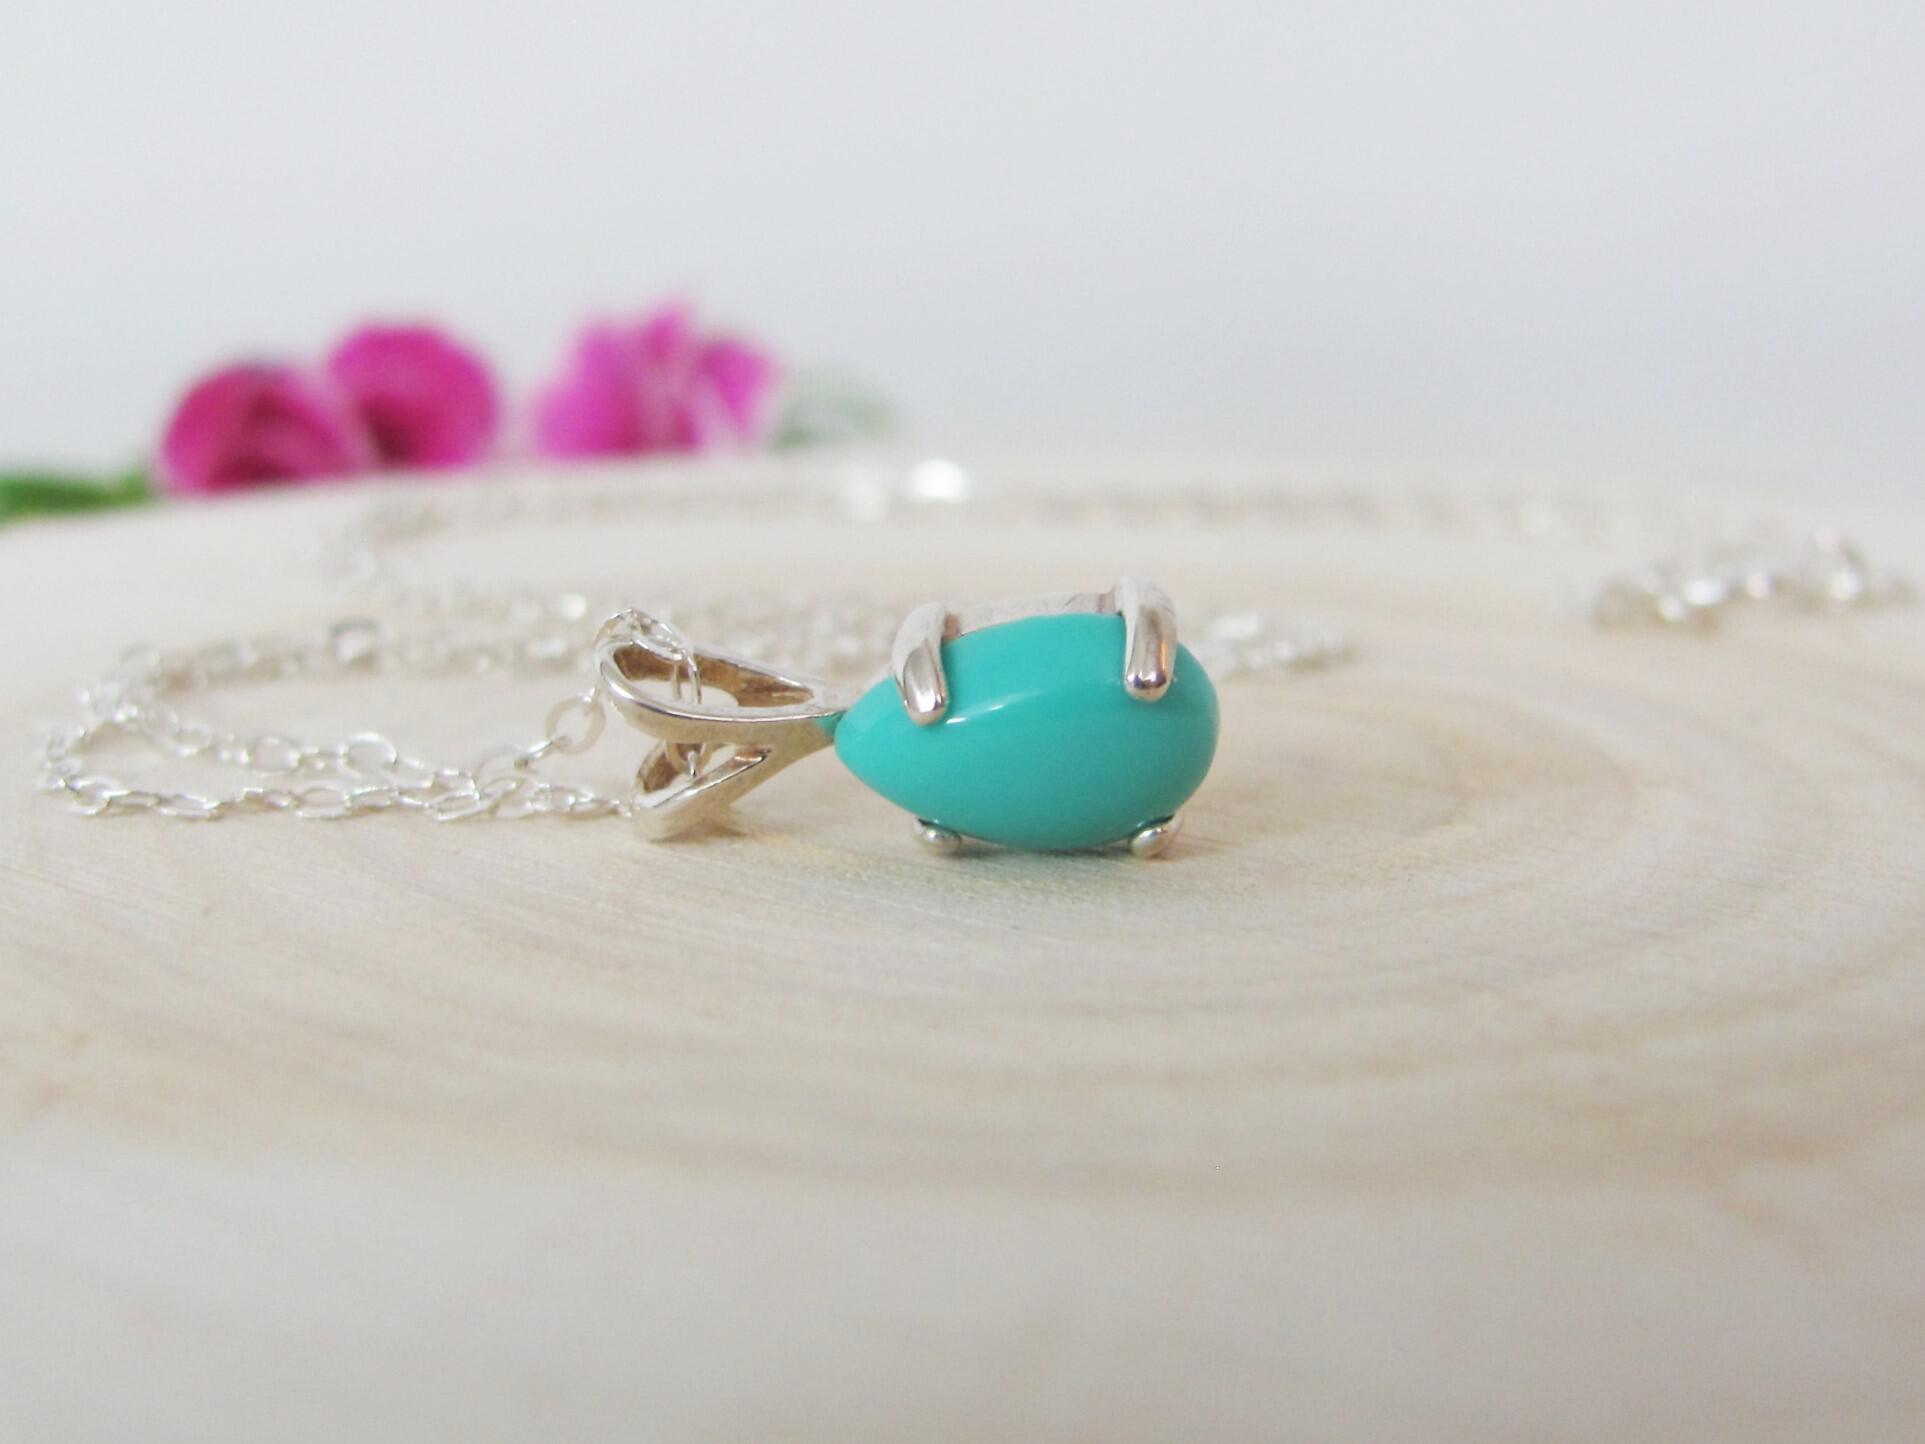 Sleeping Beauty Turquoise Pear Cut Necklace in Sterling Silver